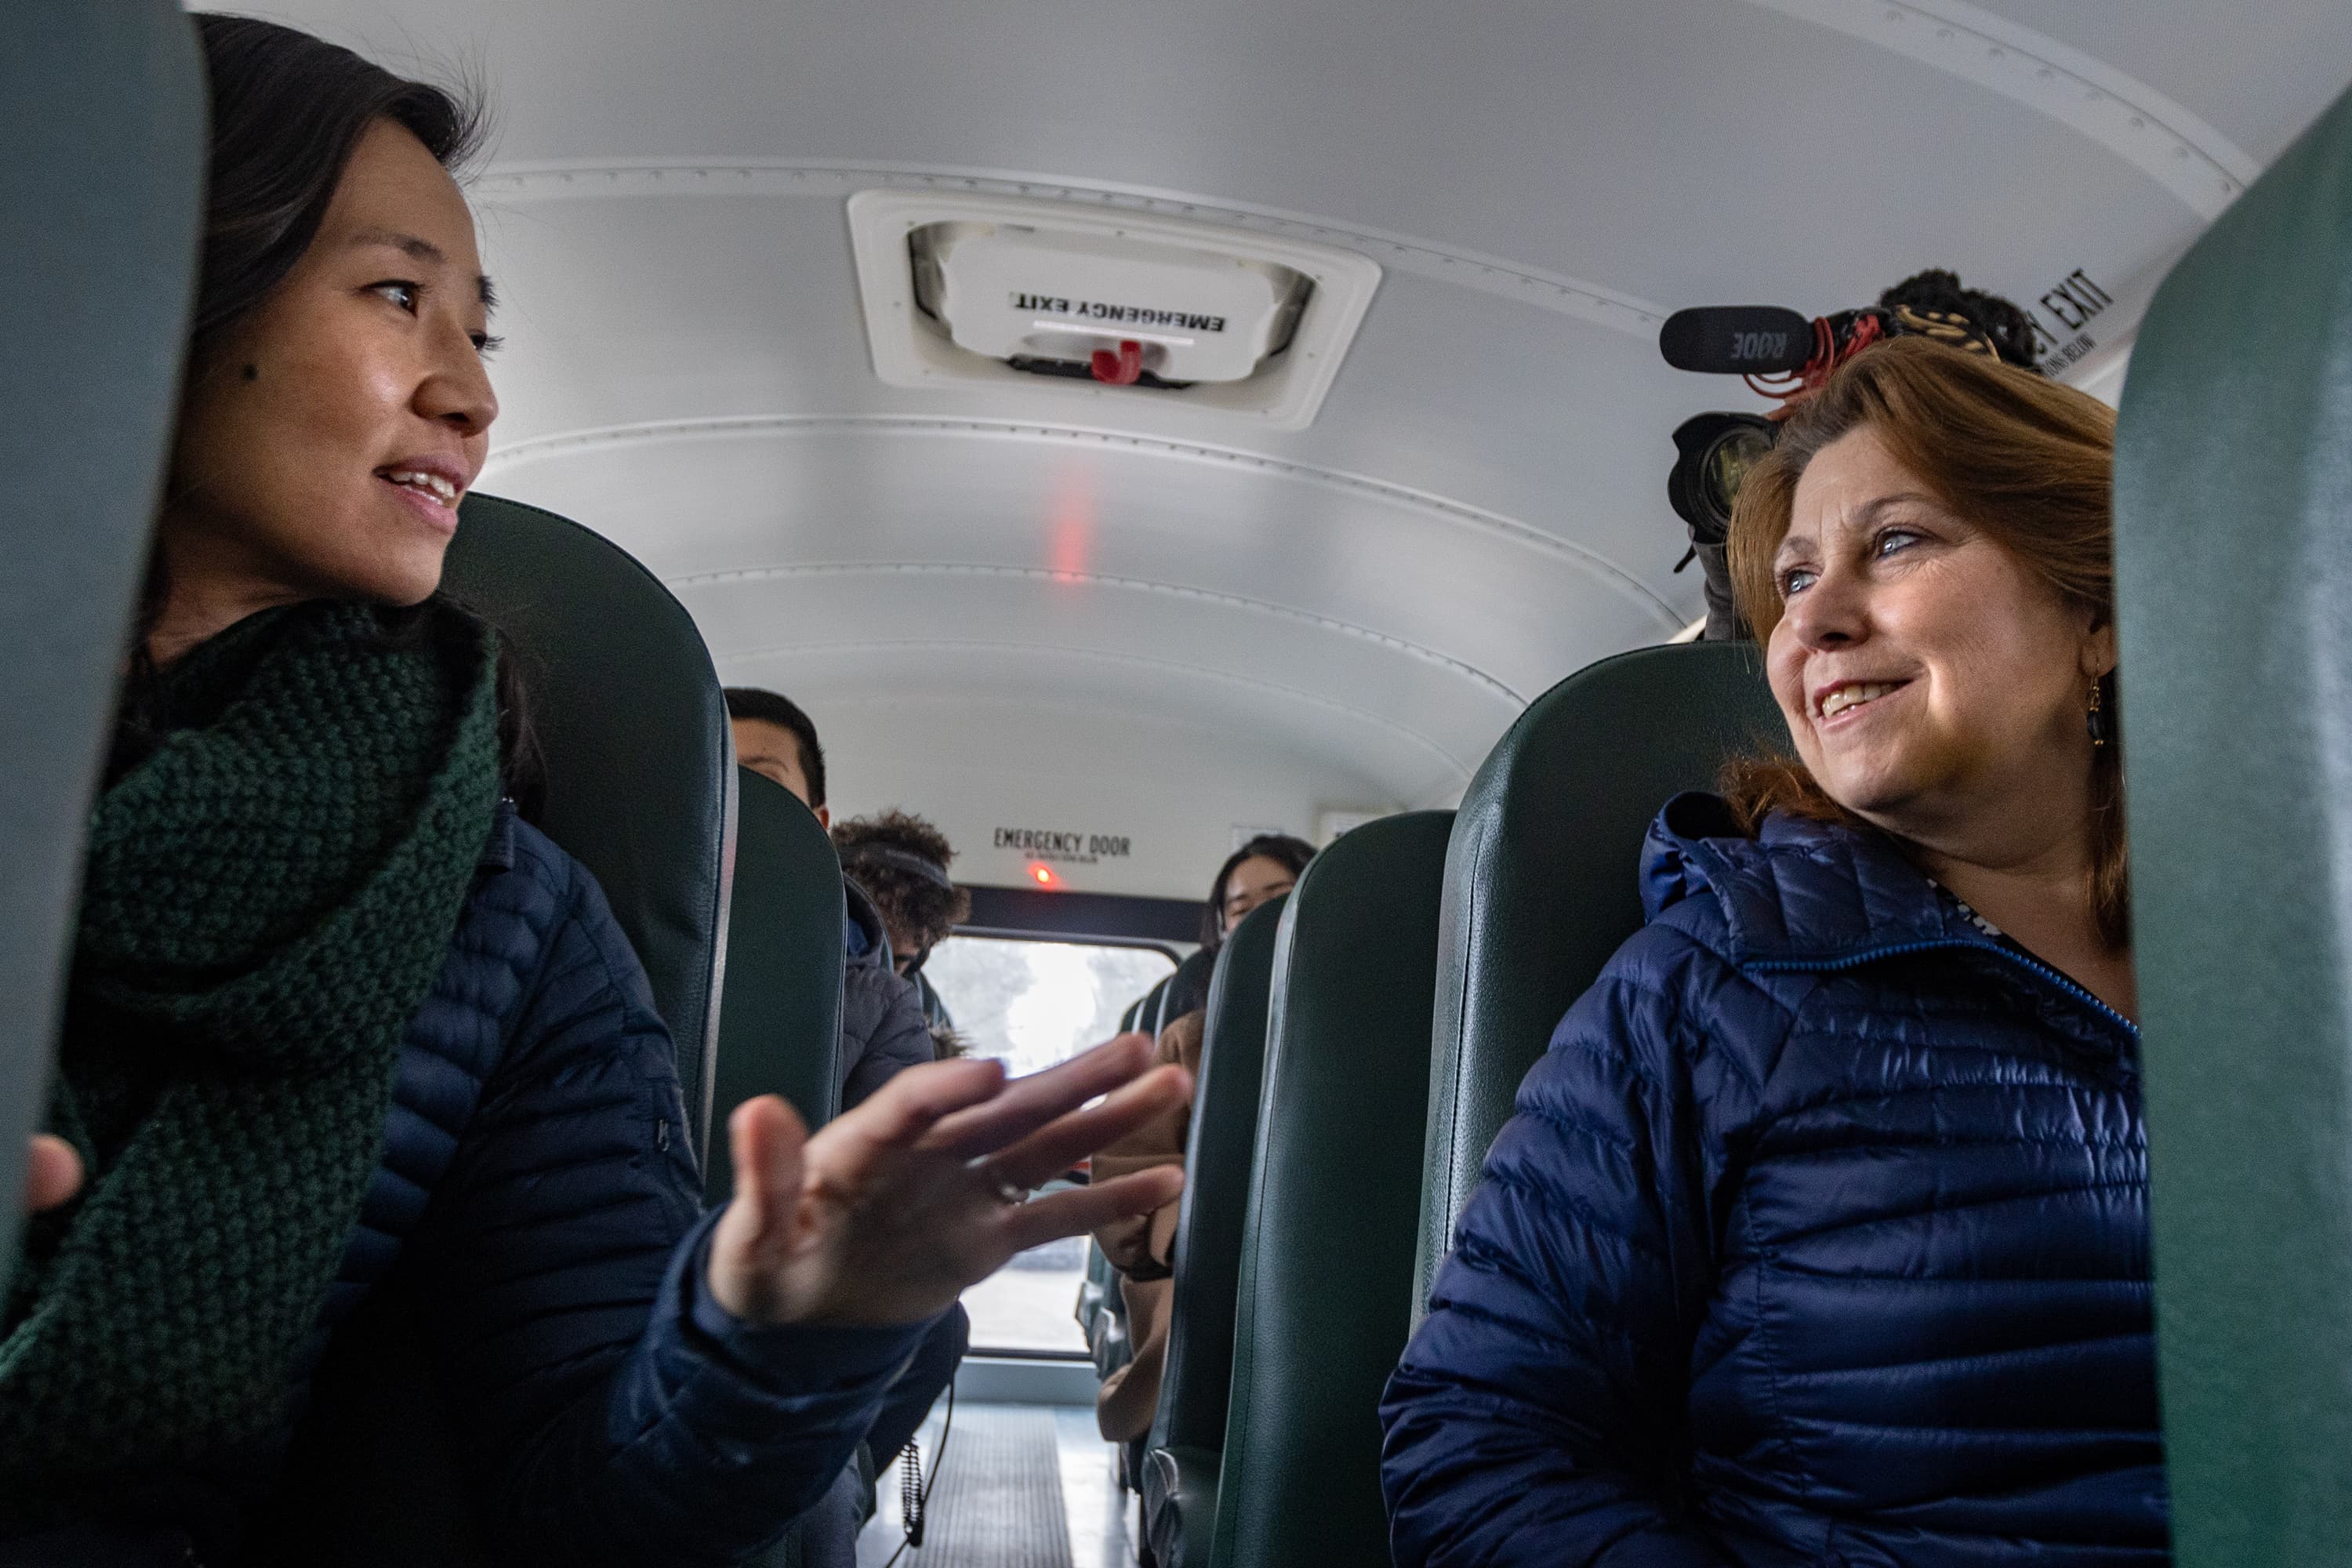 Boston Mayor, Michelle Wu, and Superintendent of Boston Public Schools, Mary Skipper, reflect on their ride in the first electric school bus added to the Boston Public Schools’ fleet. (Jesse Costa/WBUR)